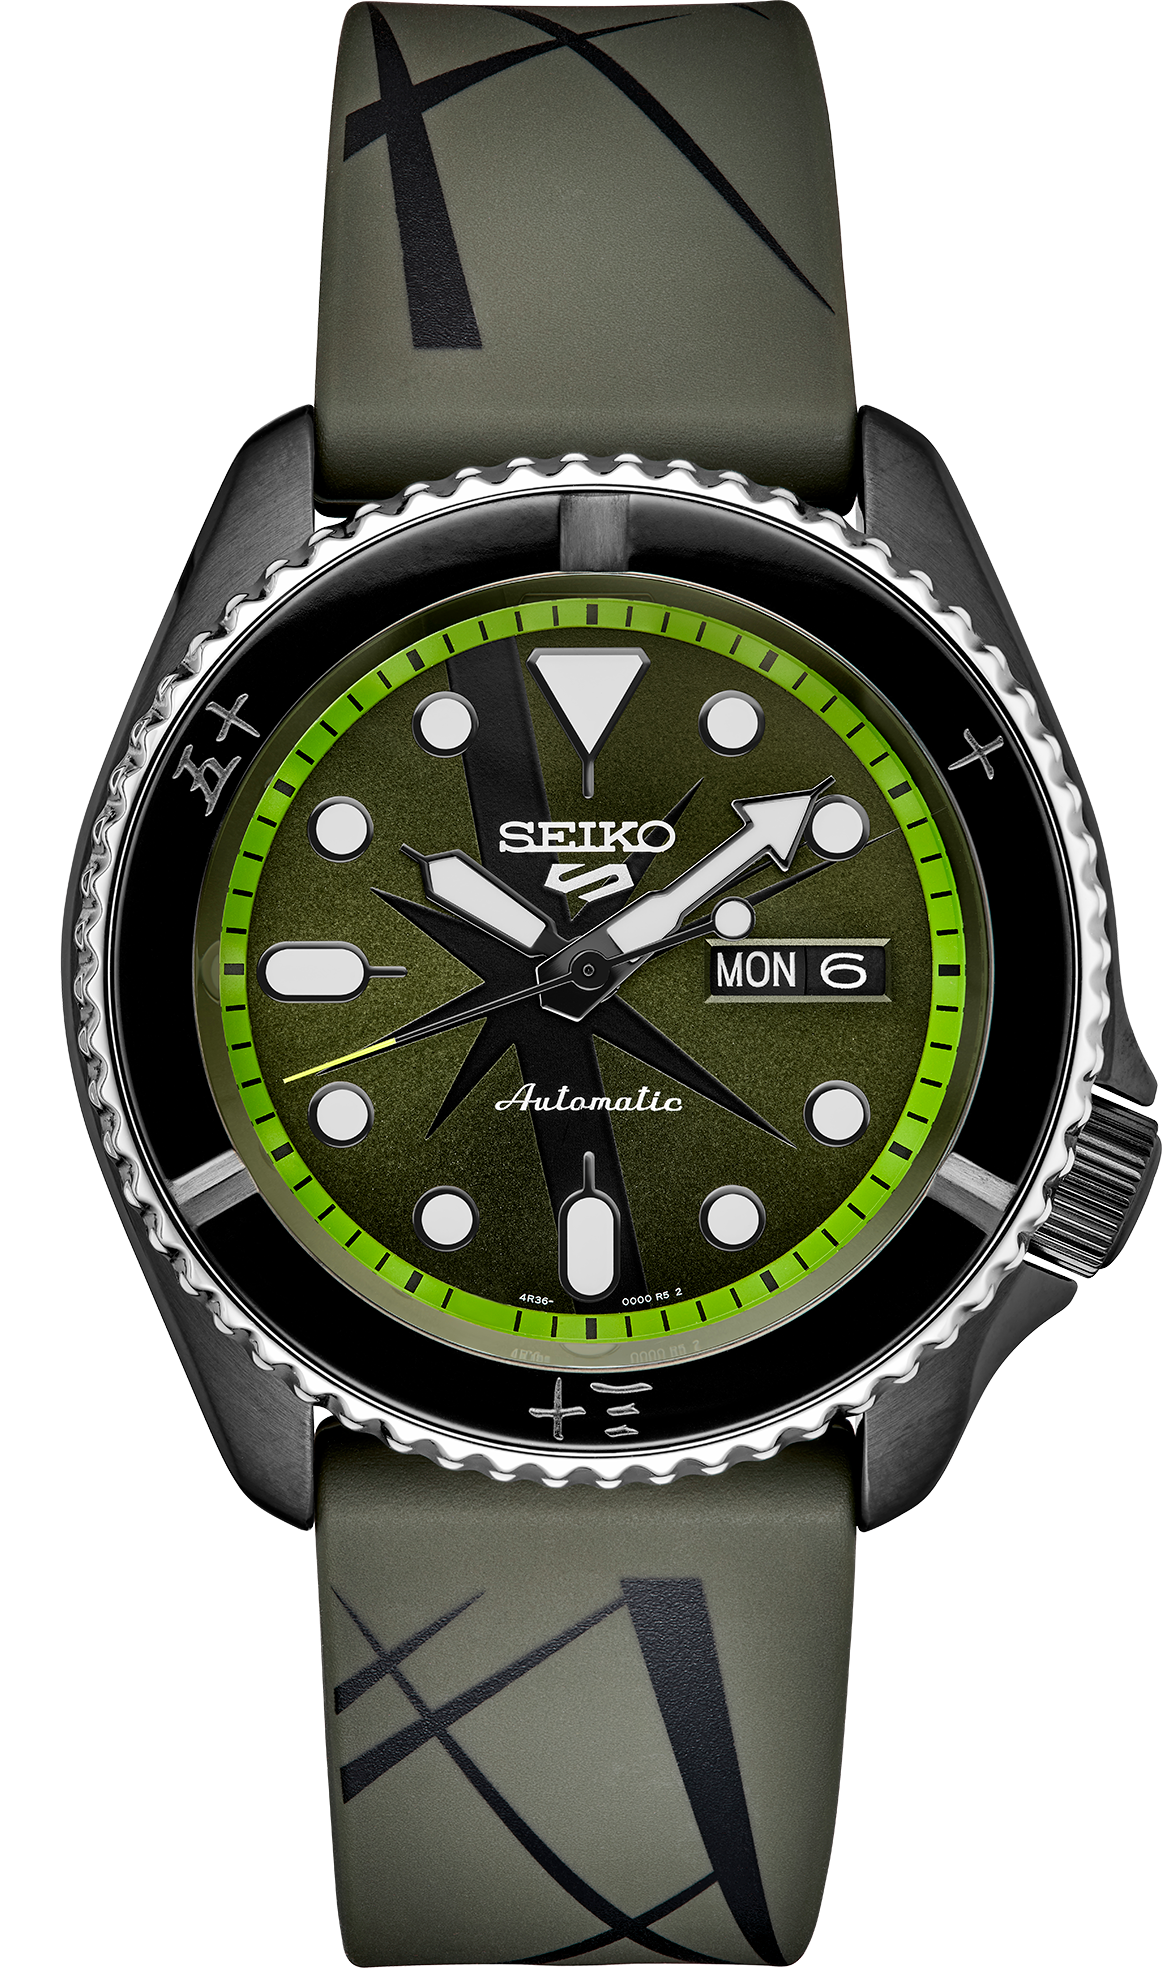 SRPH67 Seiko 5 Sports One Piece Limited Edition